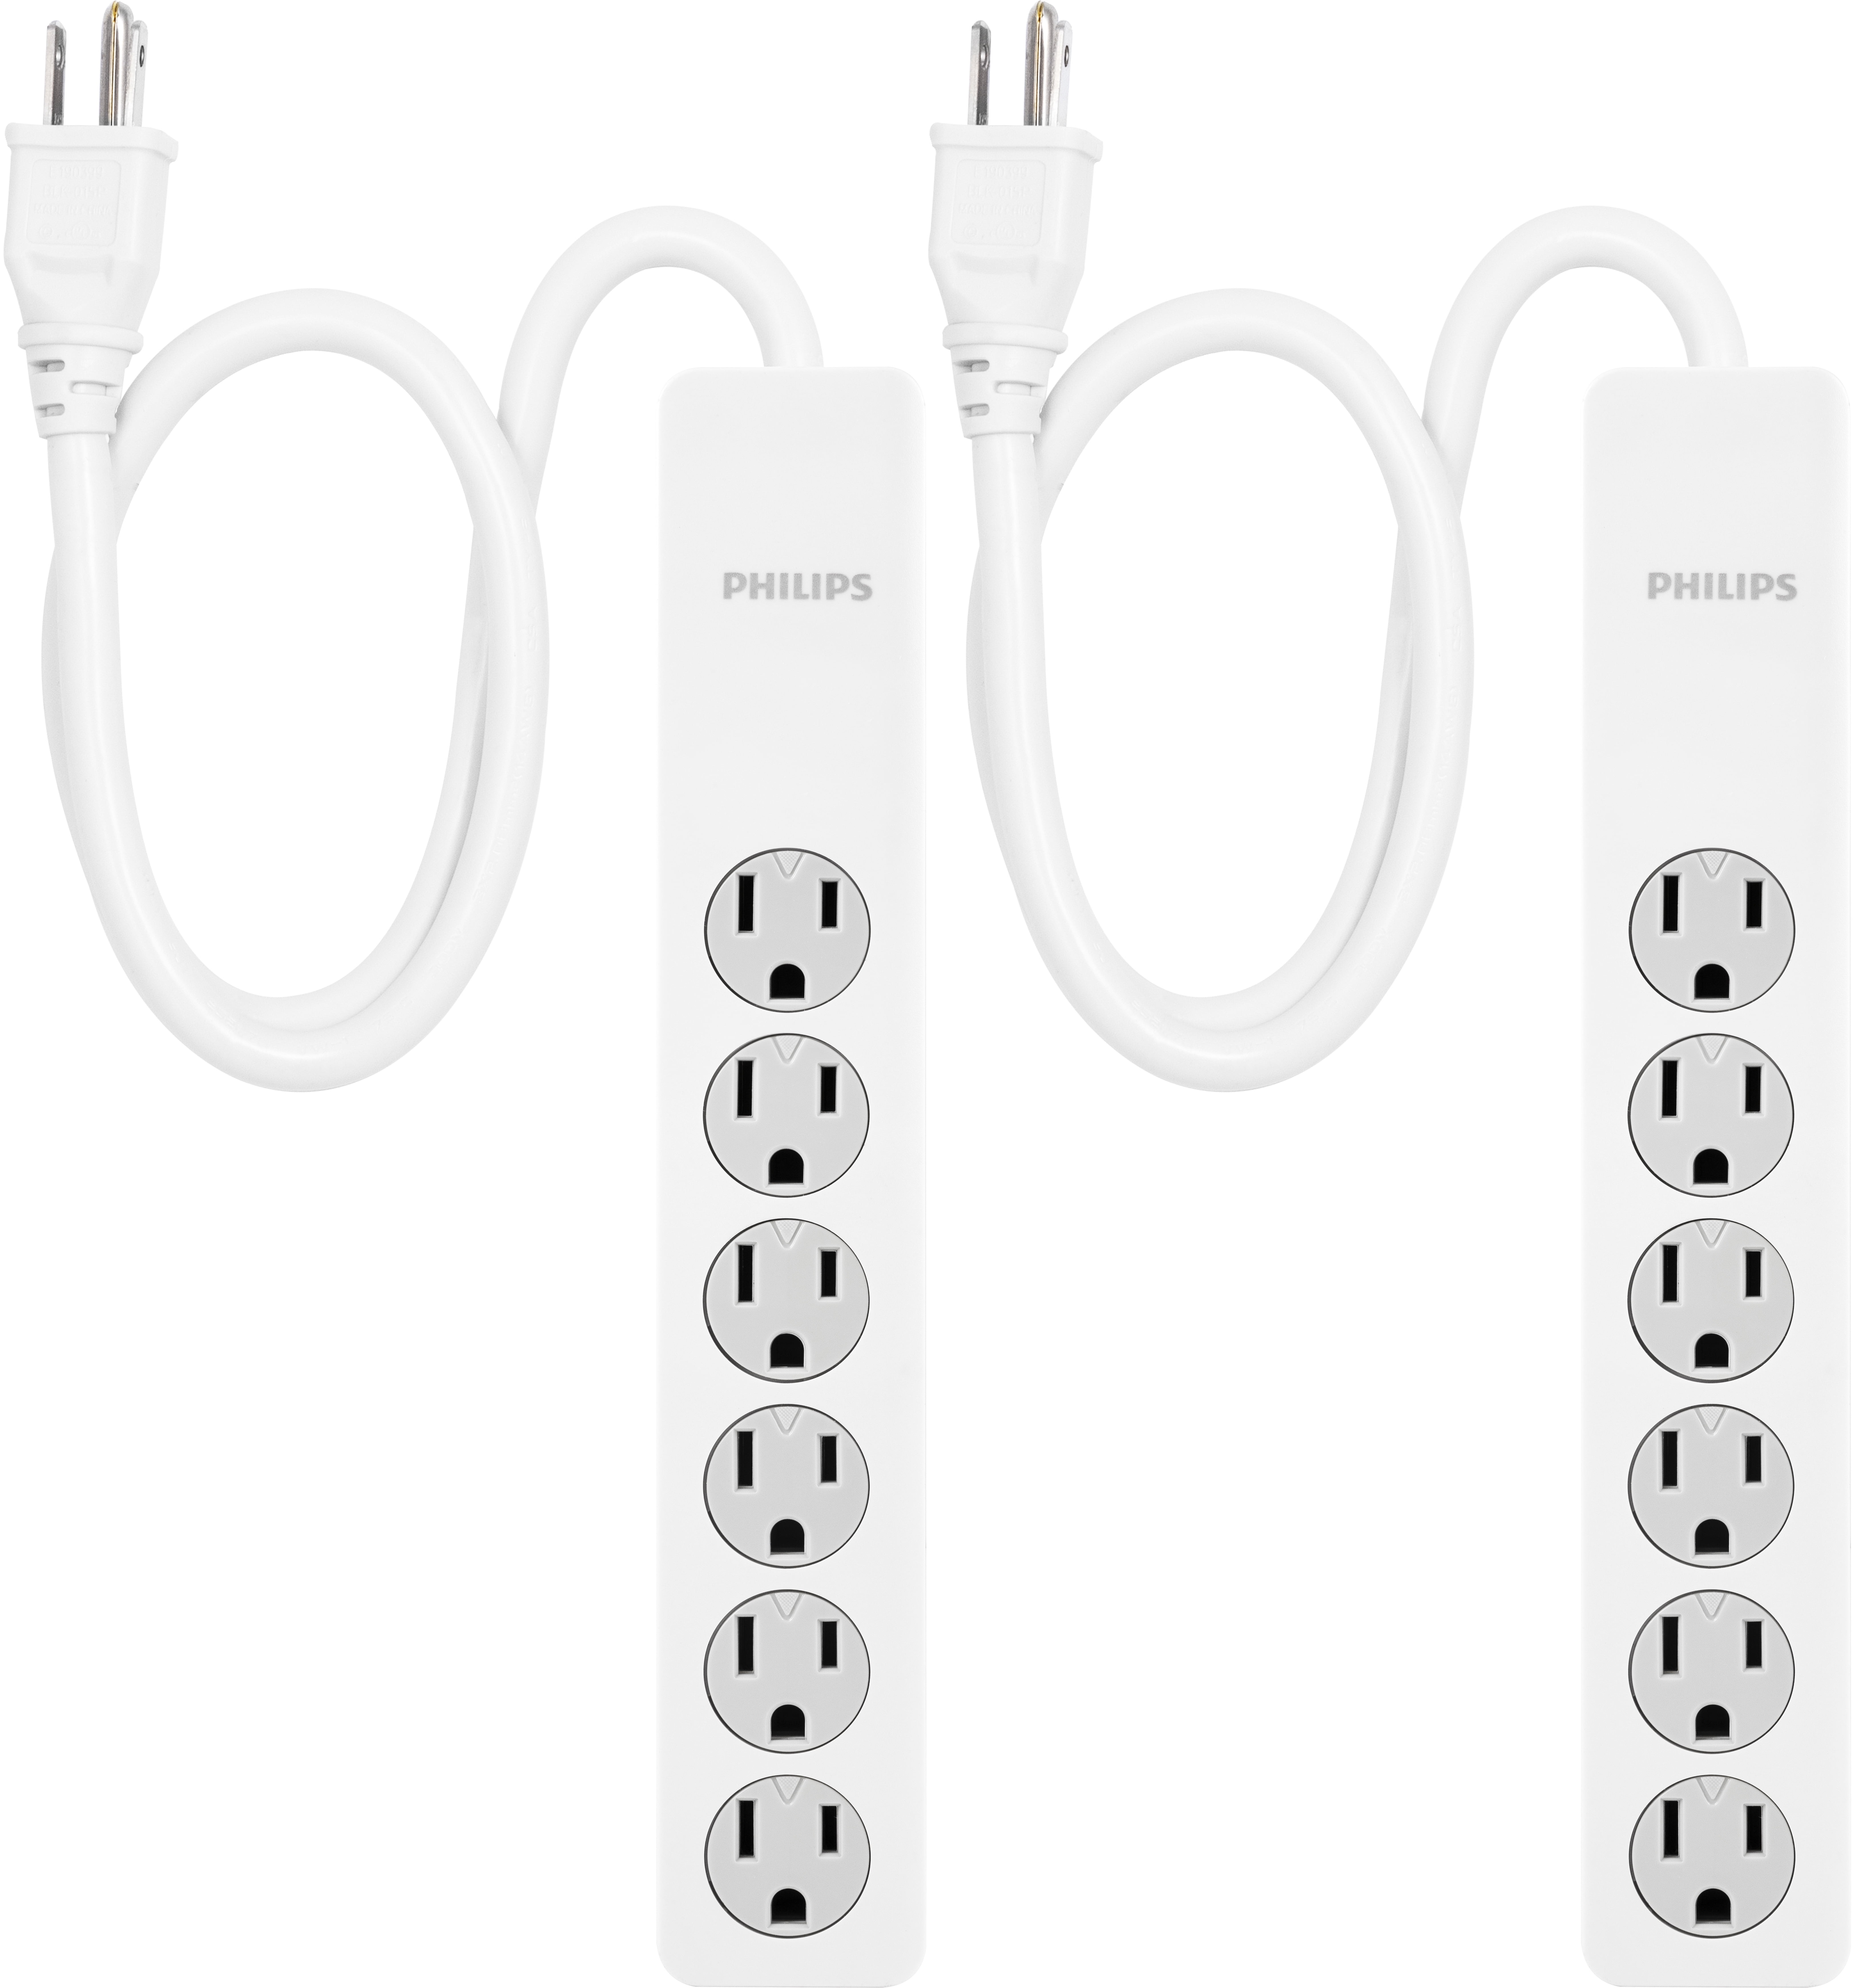 Philips 6-Outlet Surge Protector Extension Cord, 2ft., 450 Joules, 2-Pack  SPP6244WE/37-T1